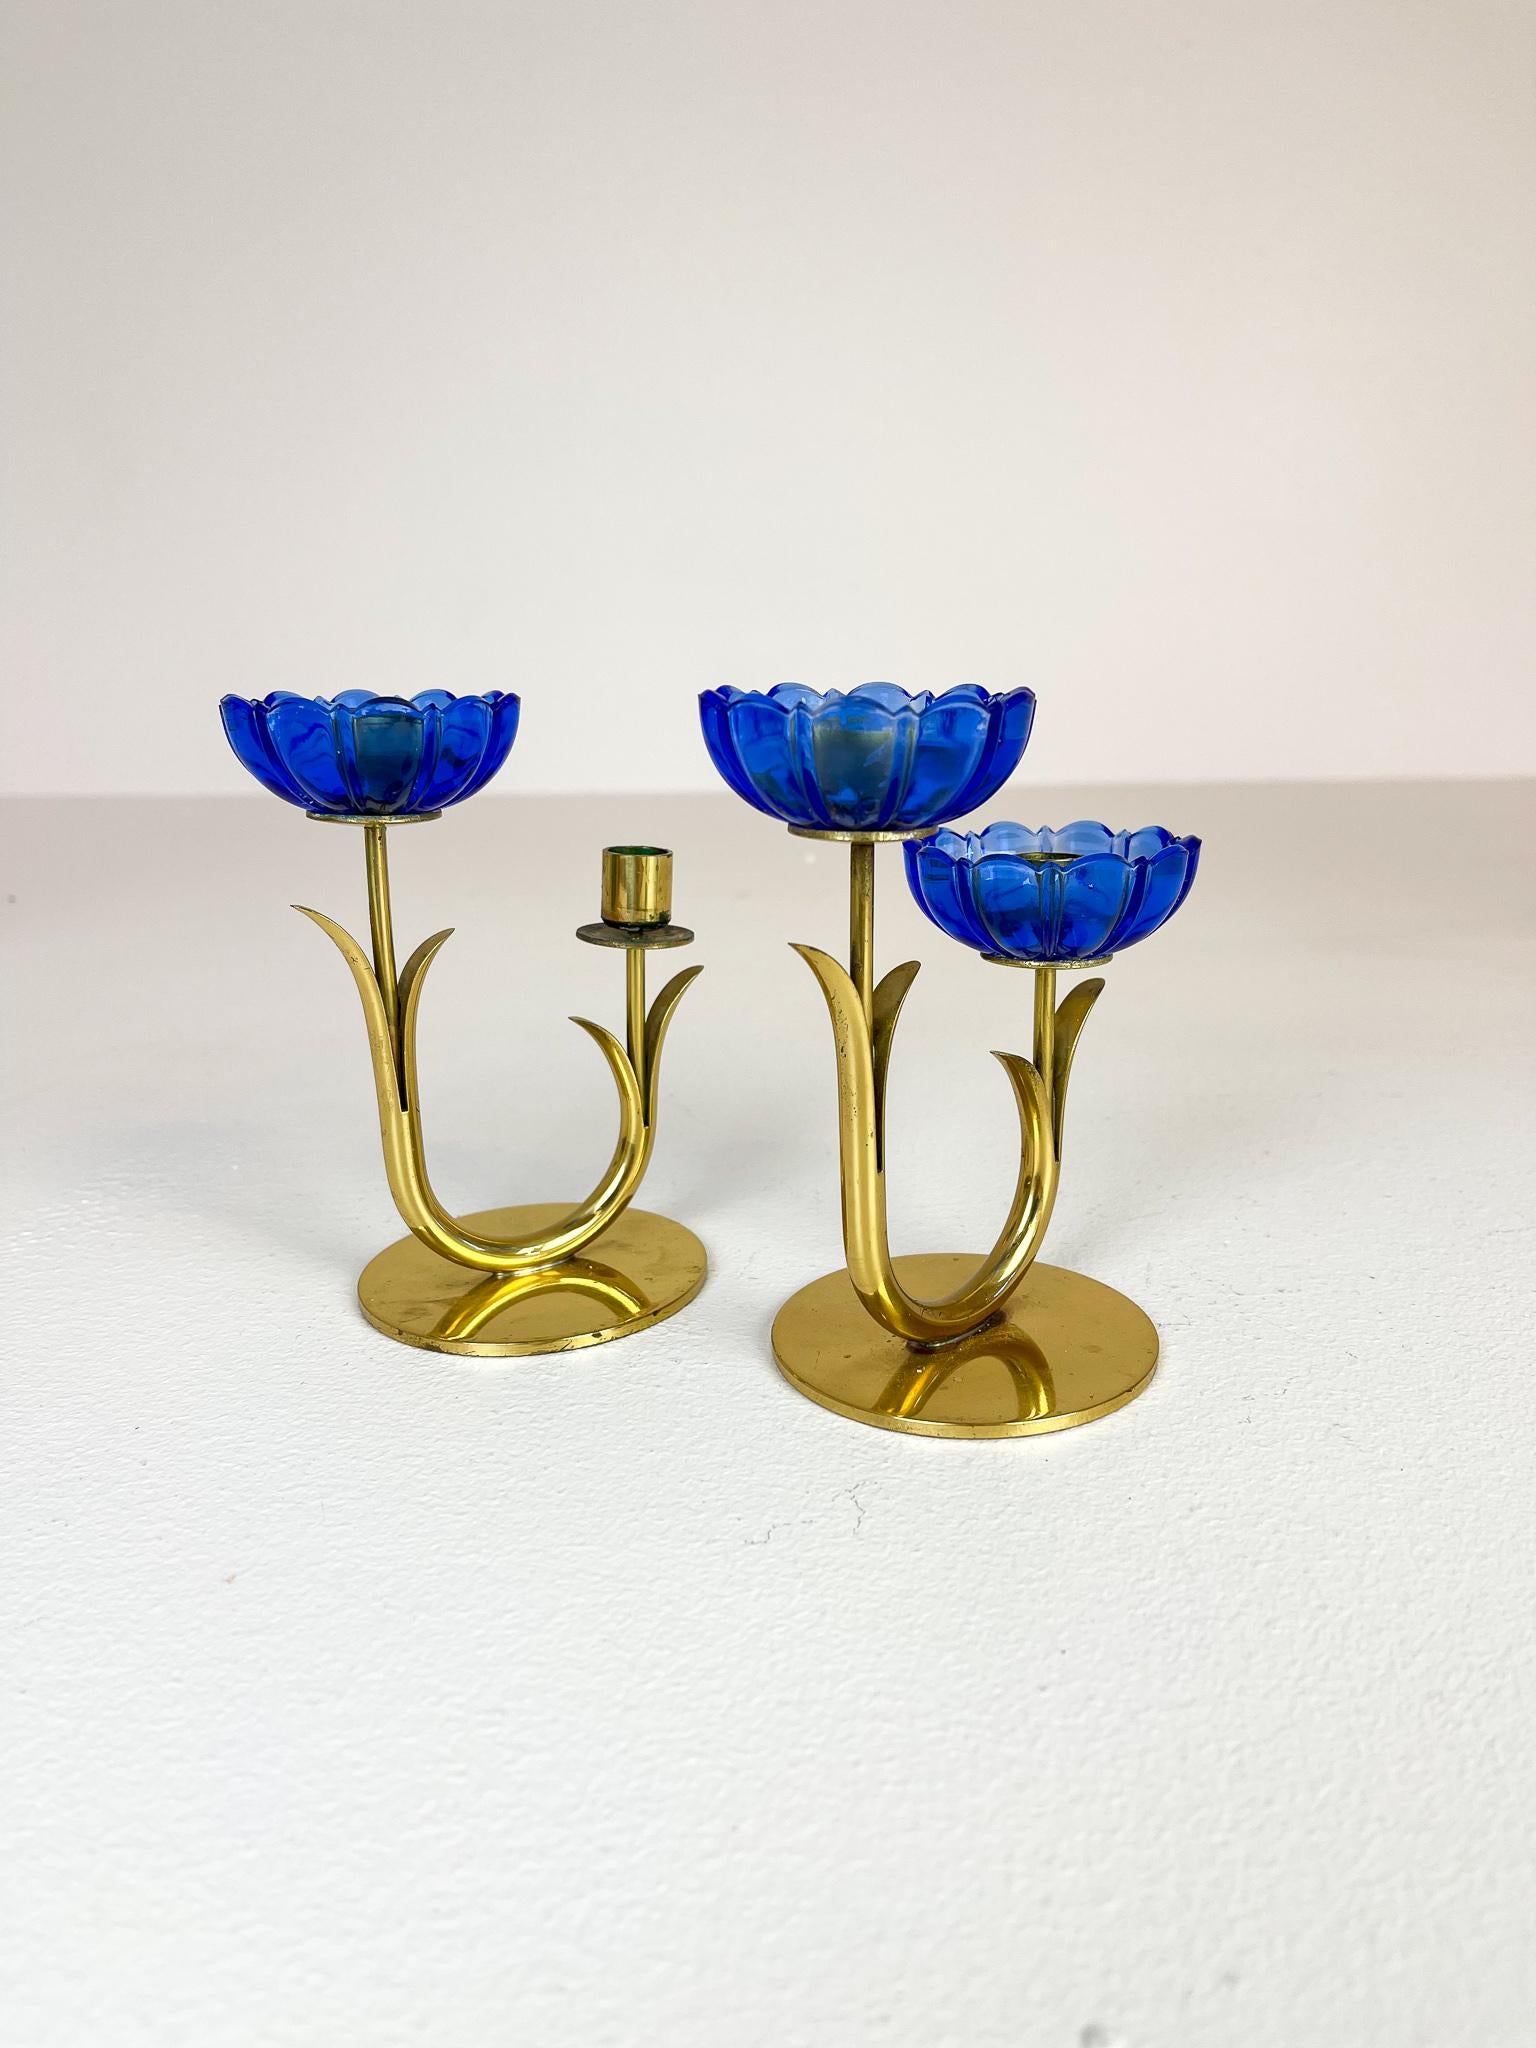 Midcentury Collection of Candle Holders Brass Ystad Metall, Sweden 4